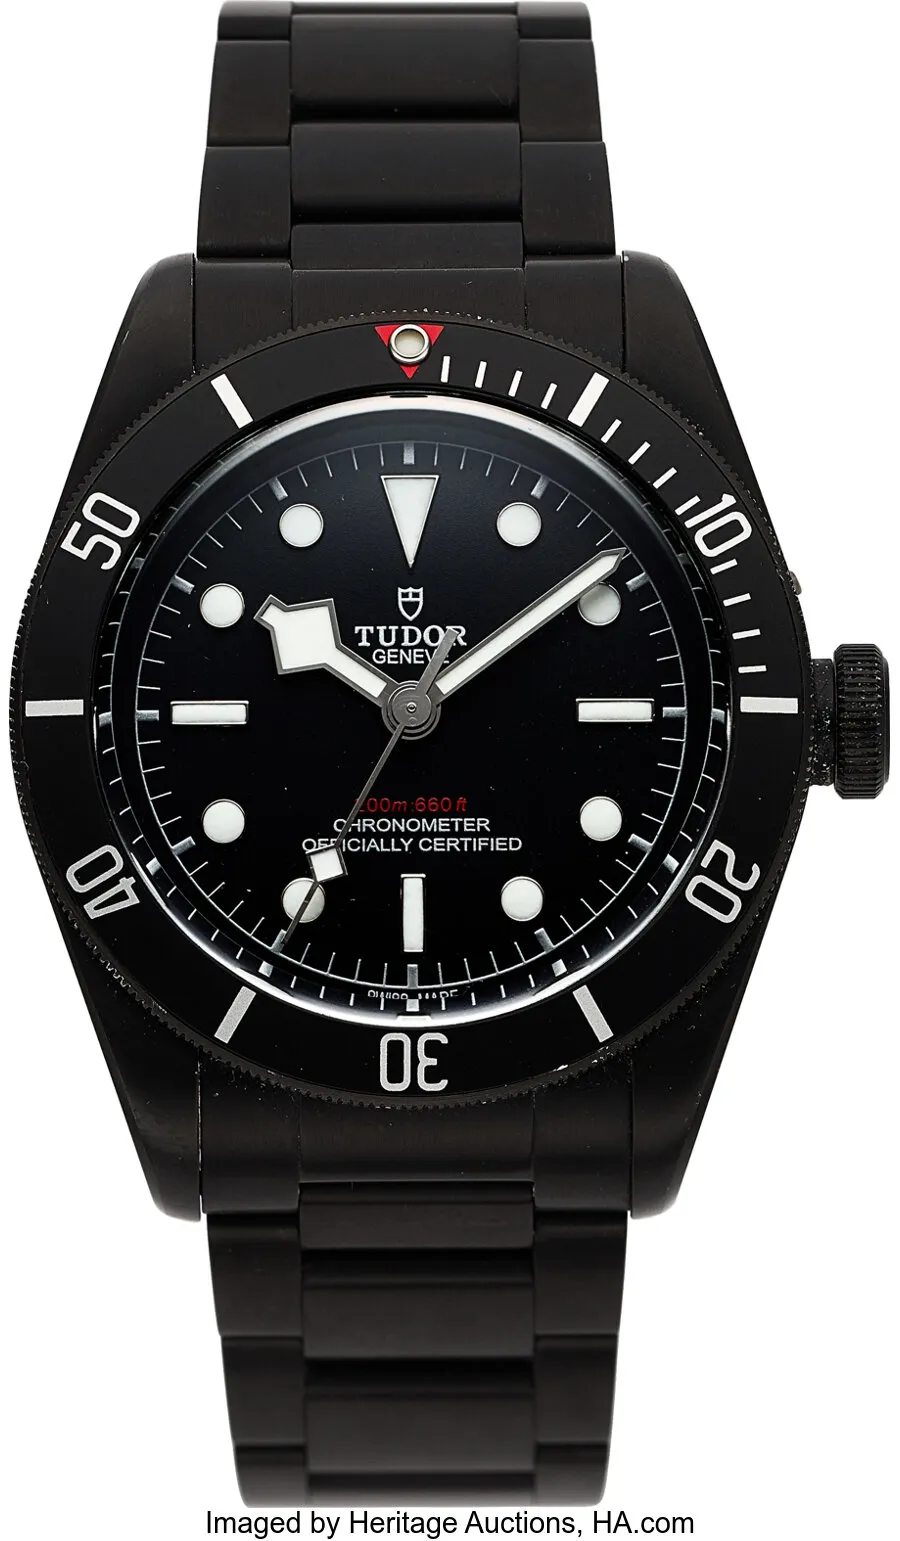 Tudor Black Bay 41mm Stainless steel with black pvd coating Black